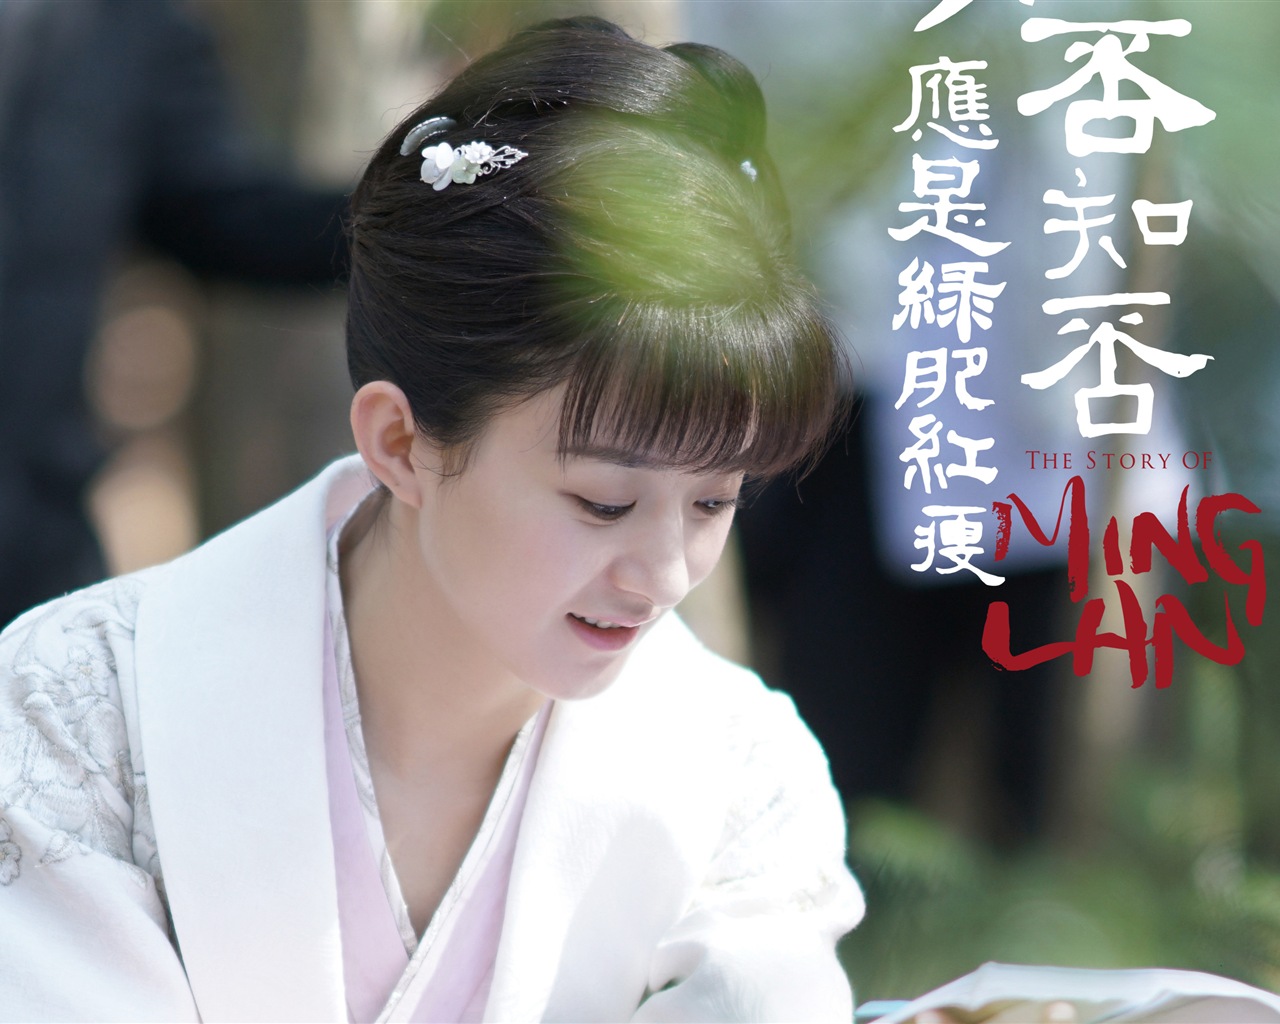 The Story Of MingLan, TV series HD wallpapers #27 - 1280x1024